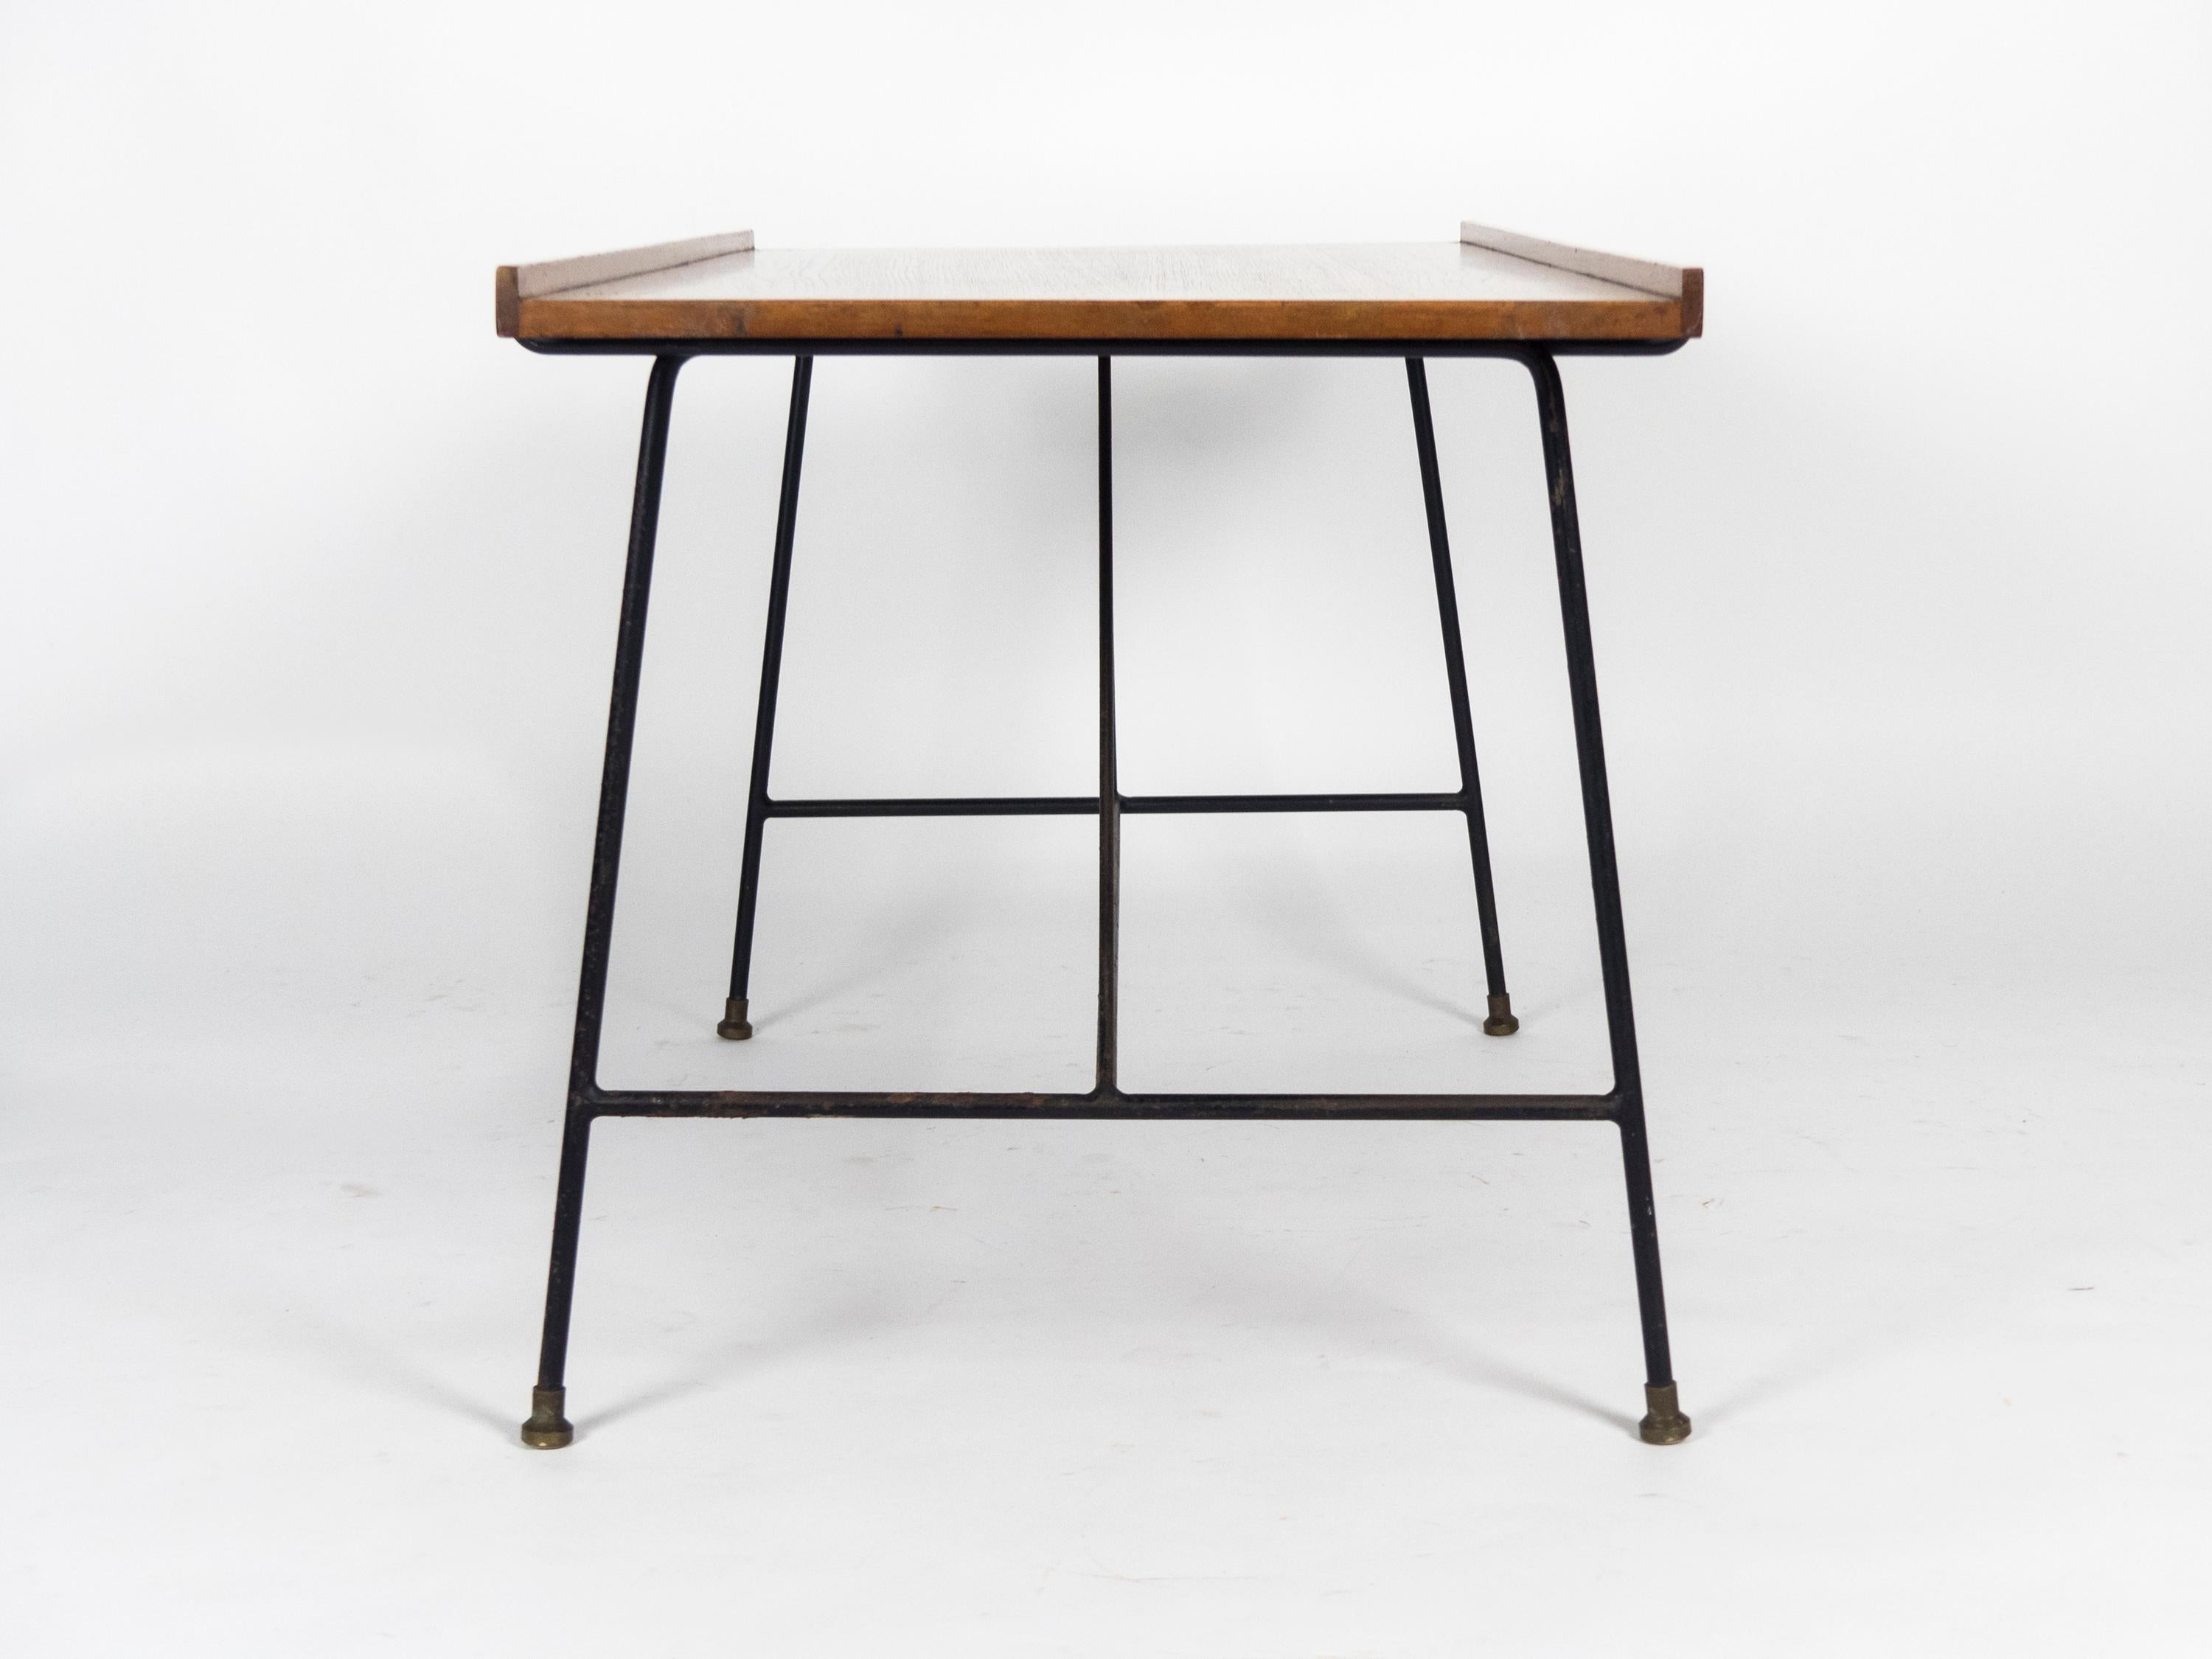 Wood Augusto Bozzi Midcentury Compasso d'Oro Awarded Coffee Table for Saporiti, 1955 For Sale